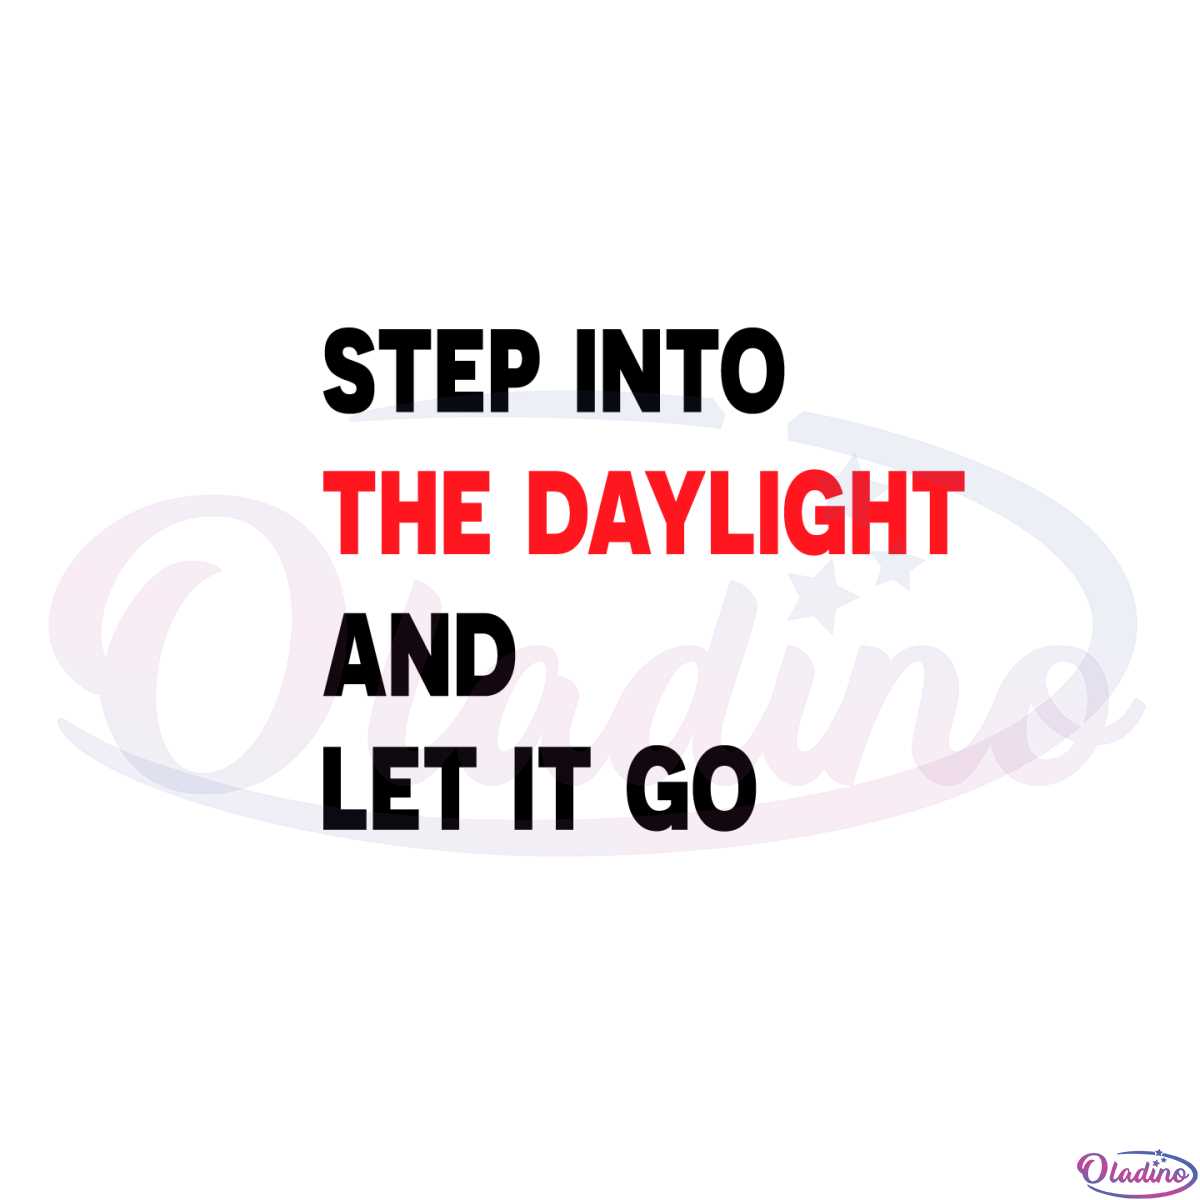 eras-tour-taylor-swift-daylight-step-in-to-the-daylight-svg